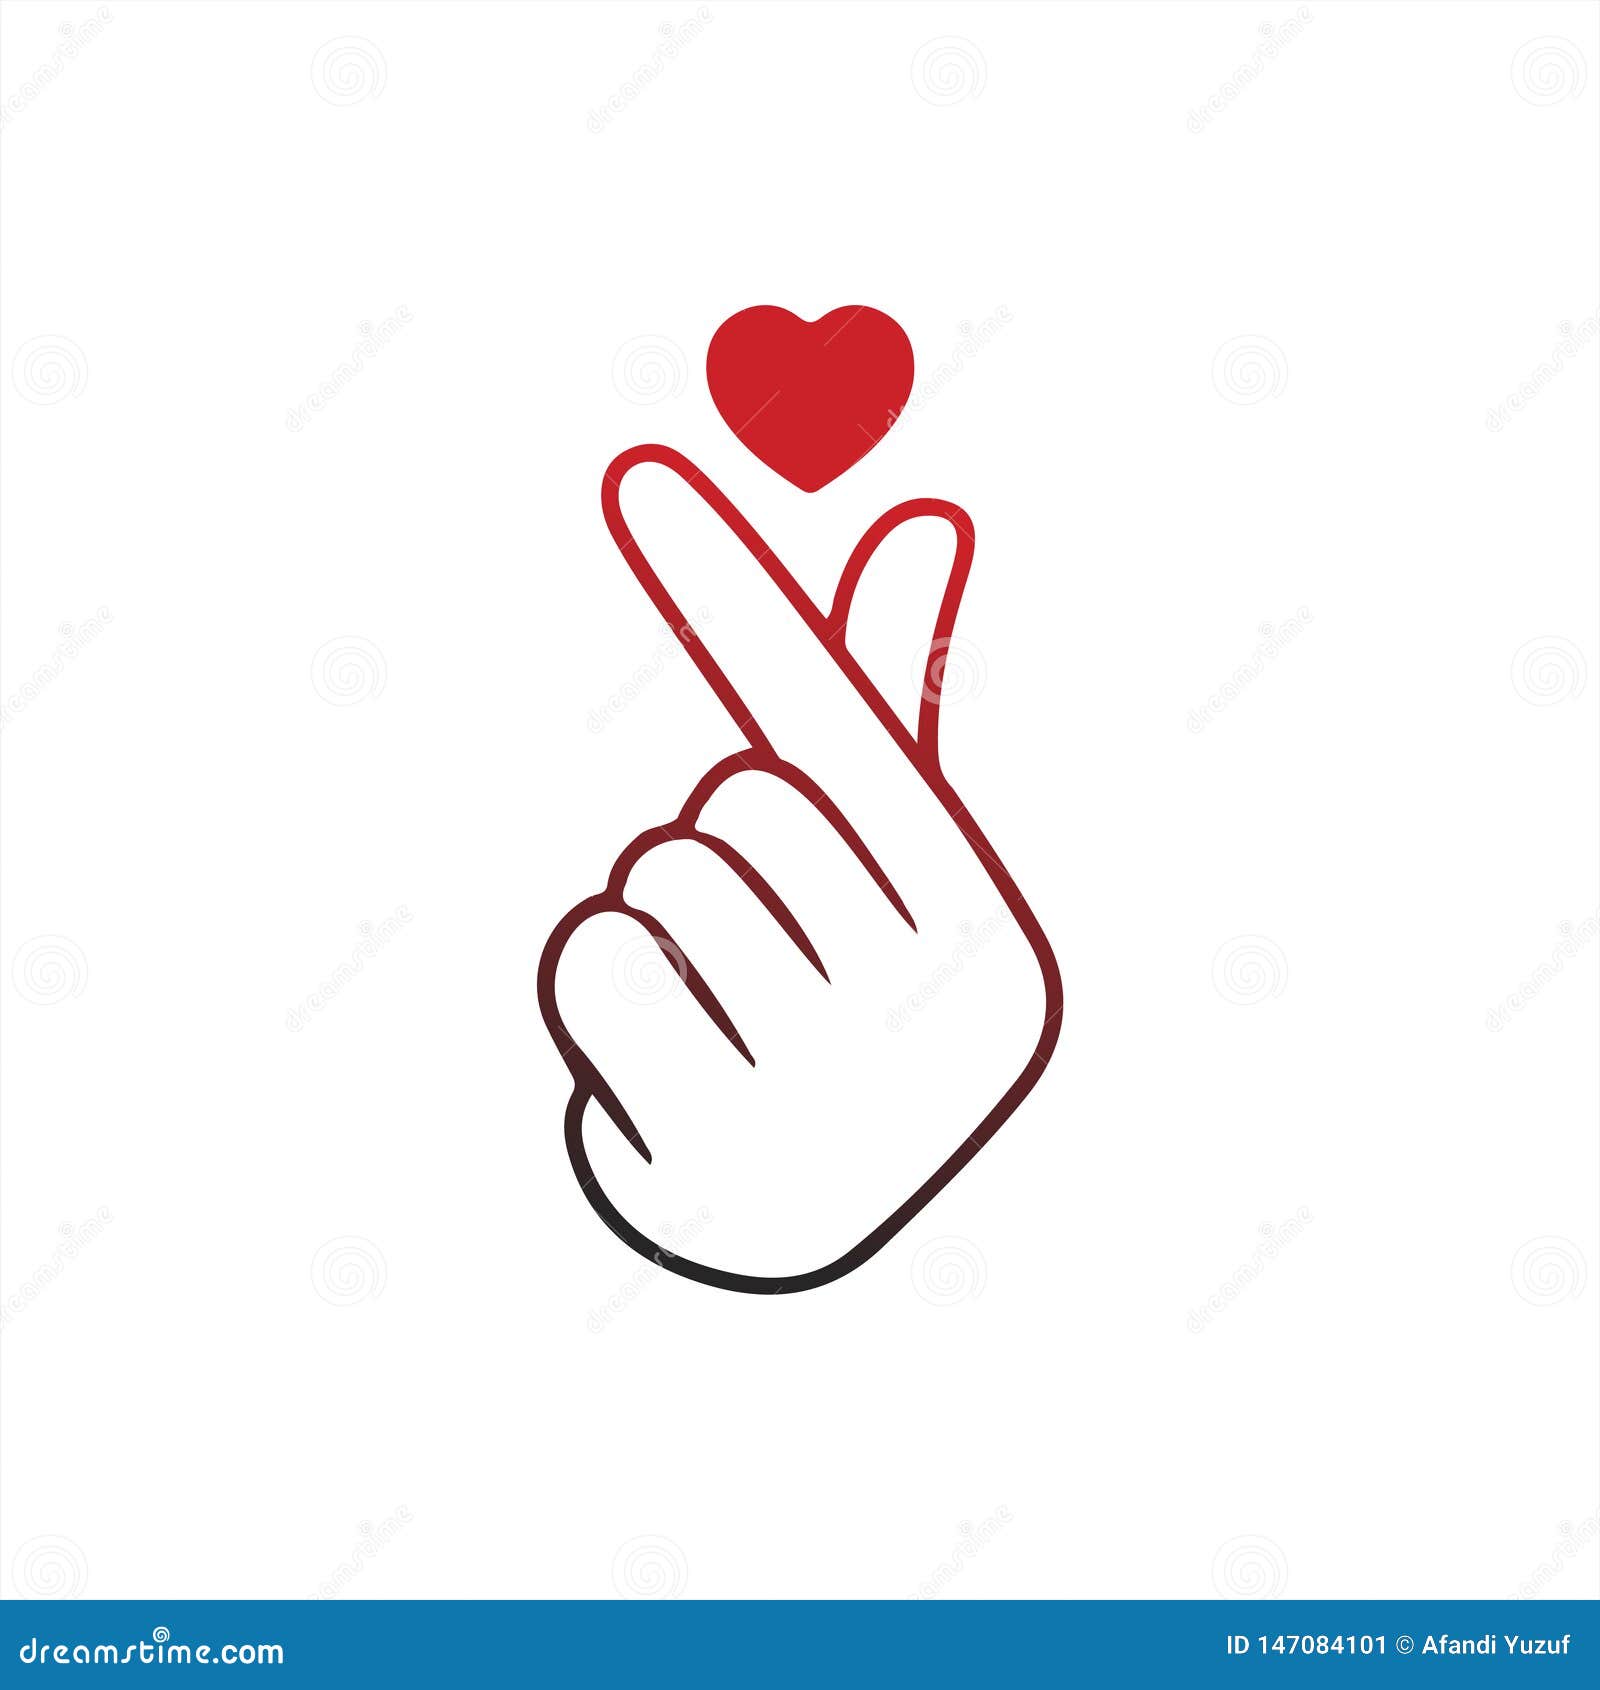 Korean Finger Heart I Love You Hangul Vector Illustration Korean Symbol Hand Heart A Message Of Love Hand Gesture Sign Icon S Stock Vector Illustration Of Abstract Happy